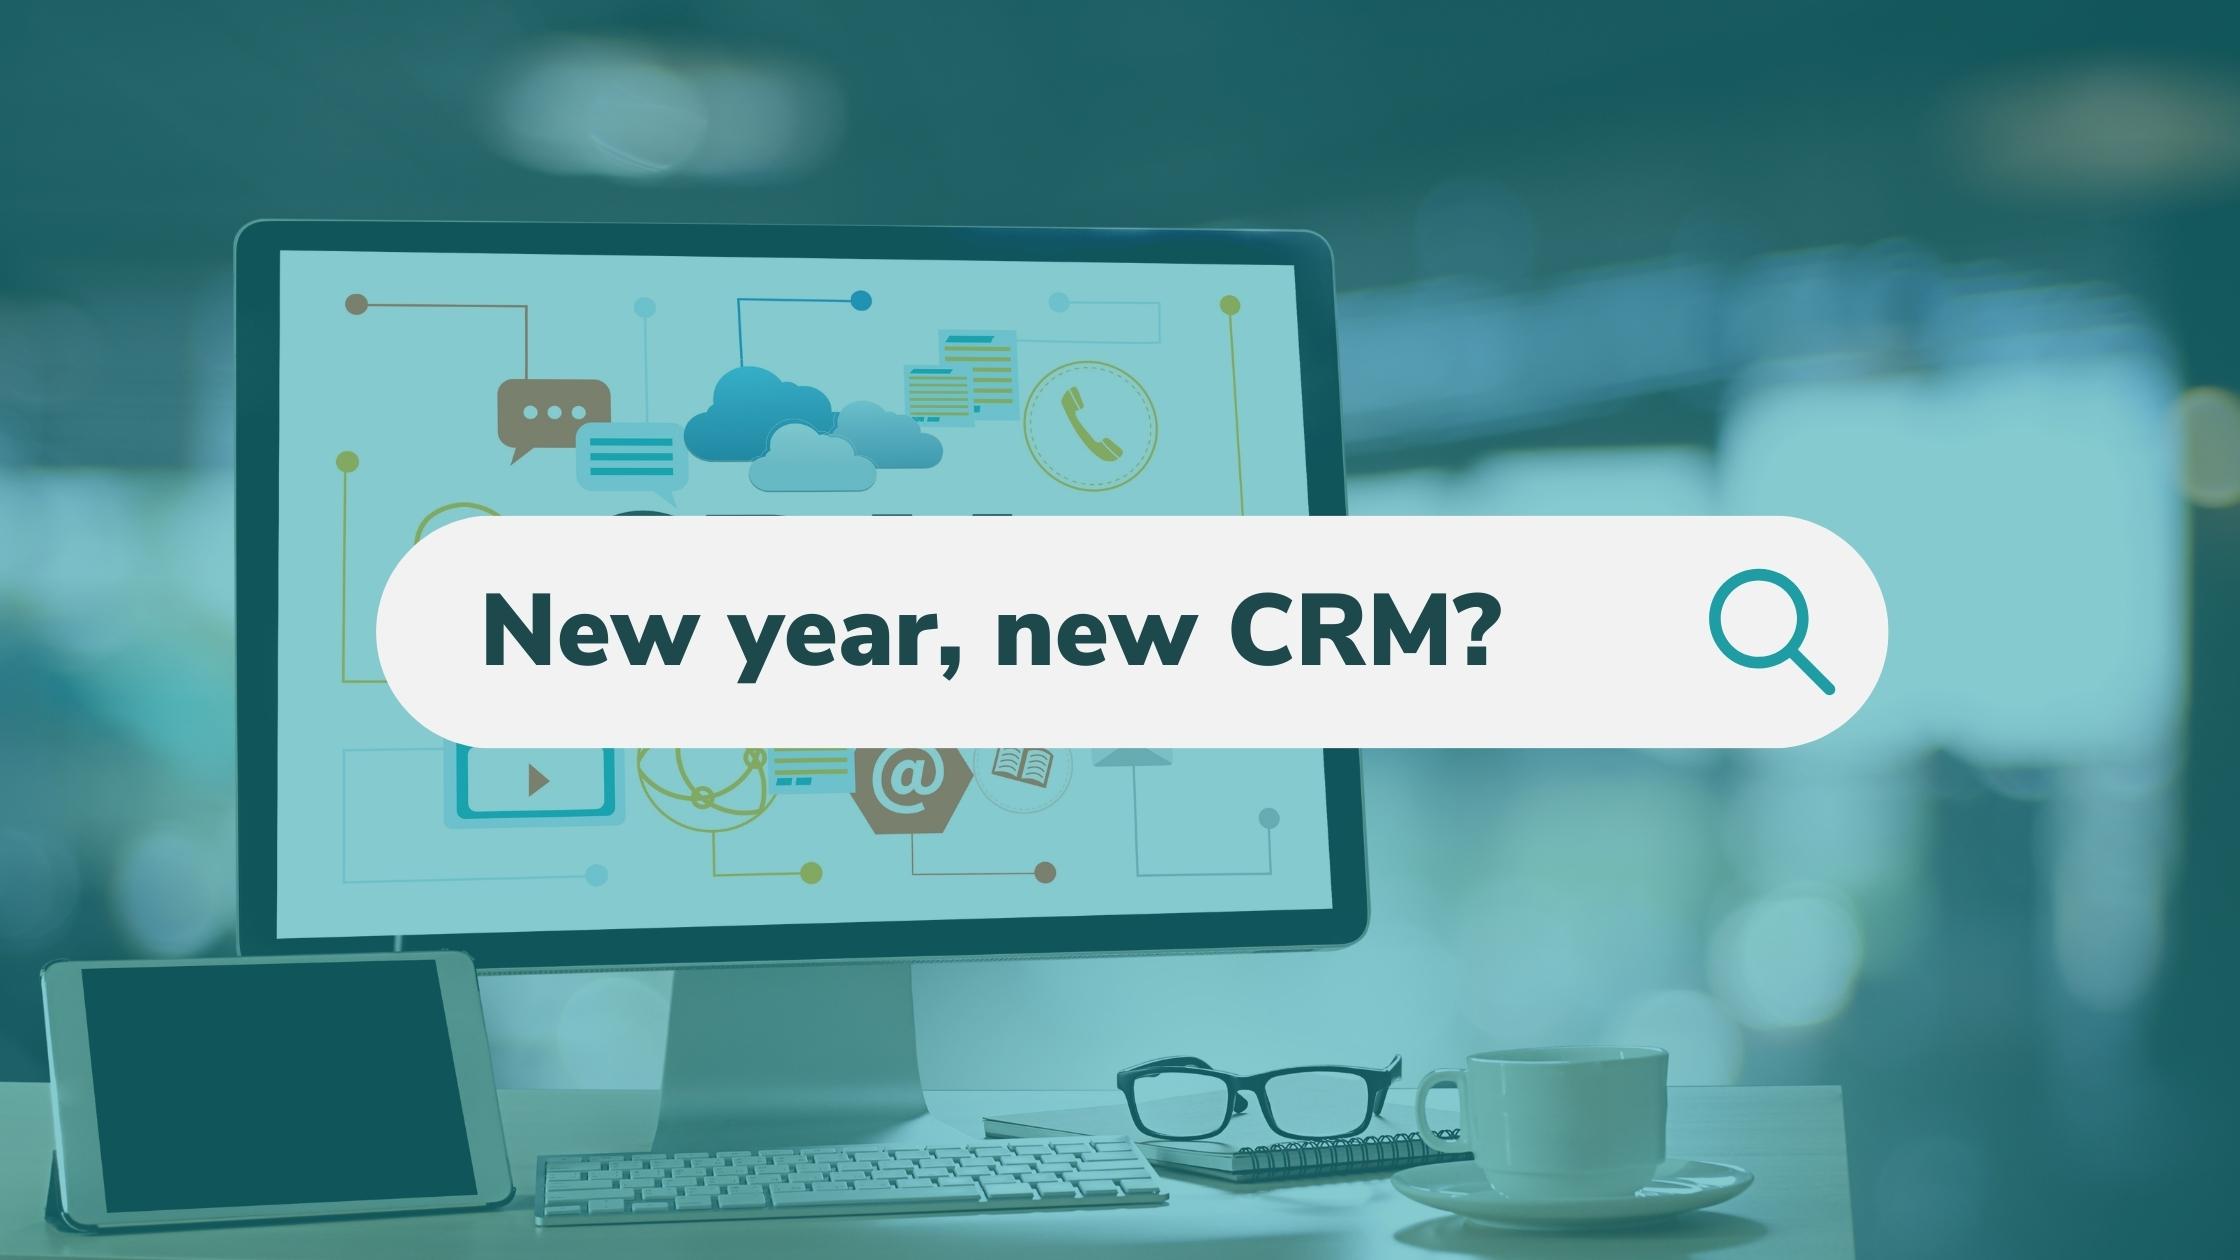 New year, new CRM? How HubSpot can help transform the way you work in 2022!